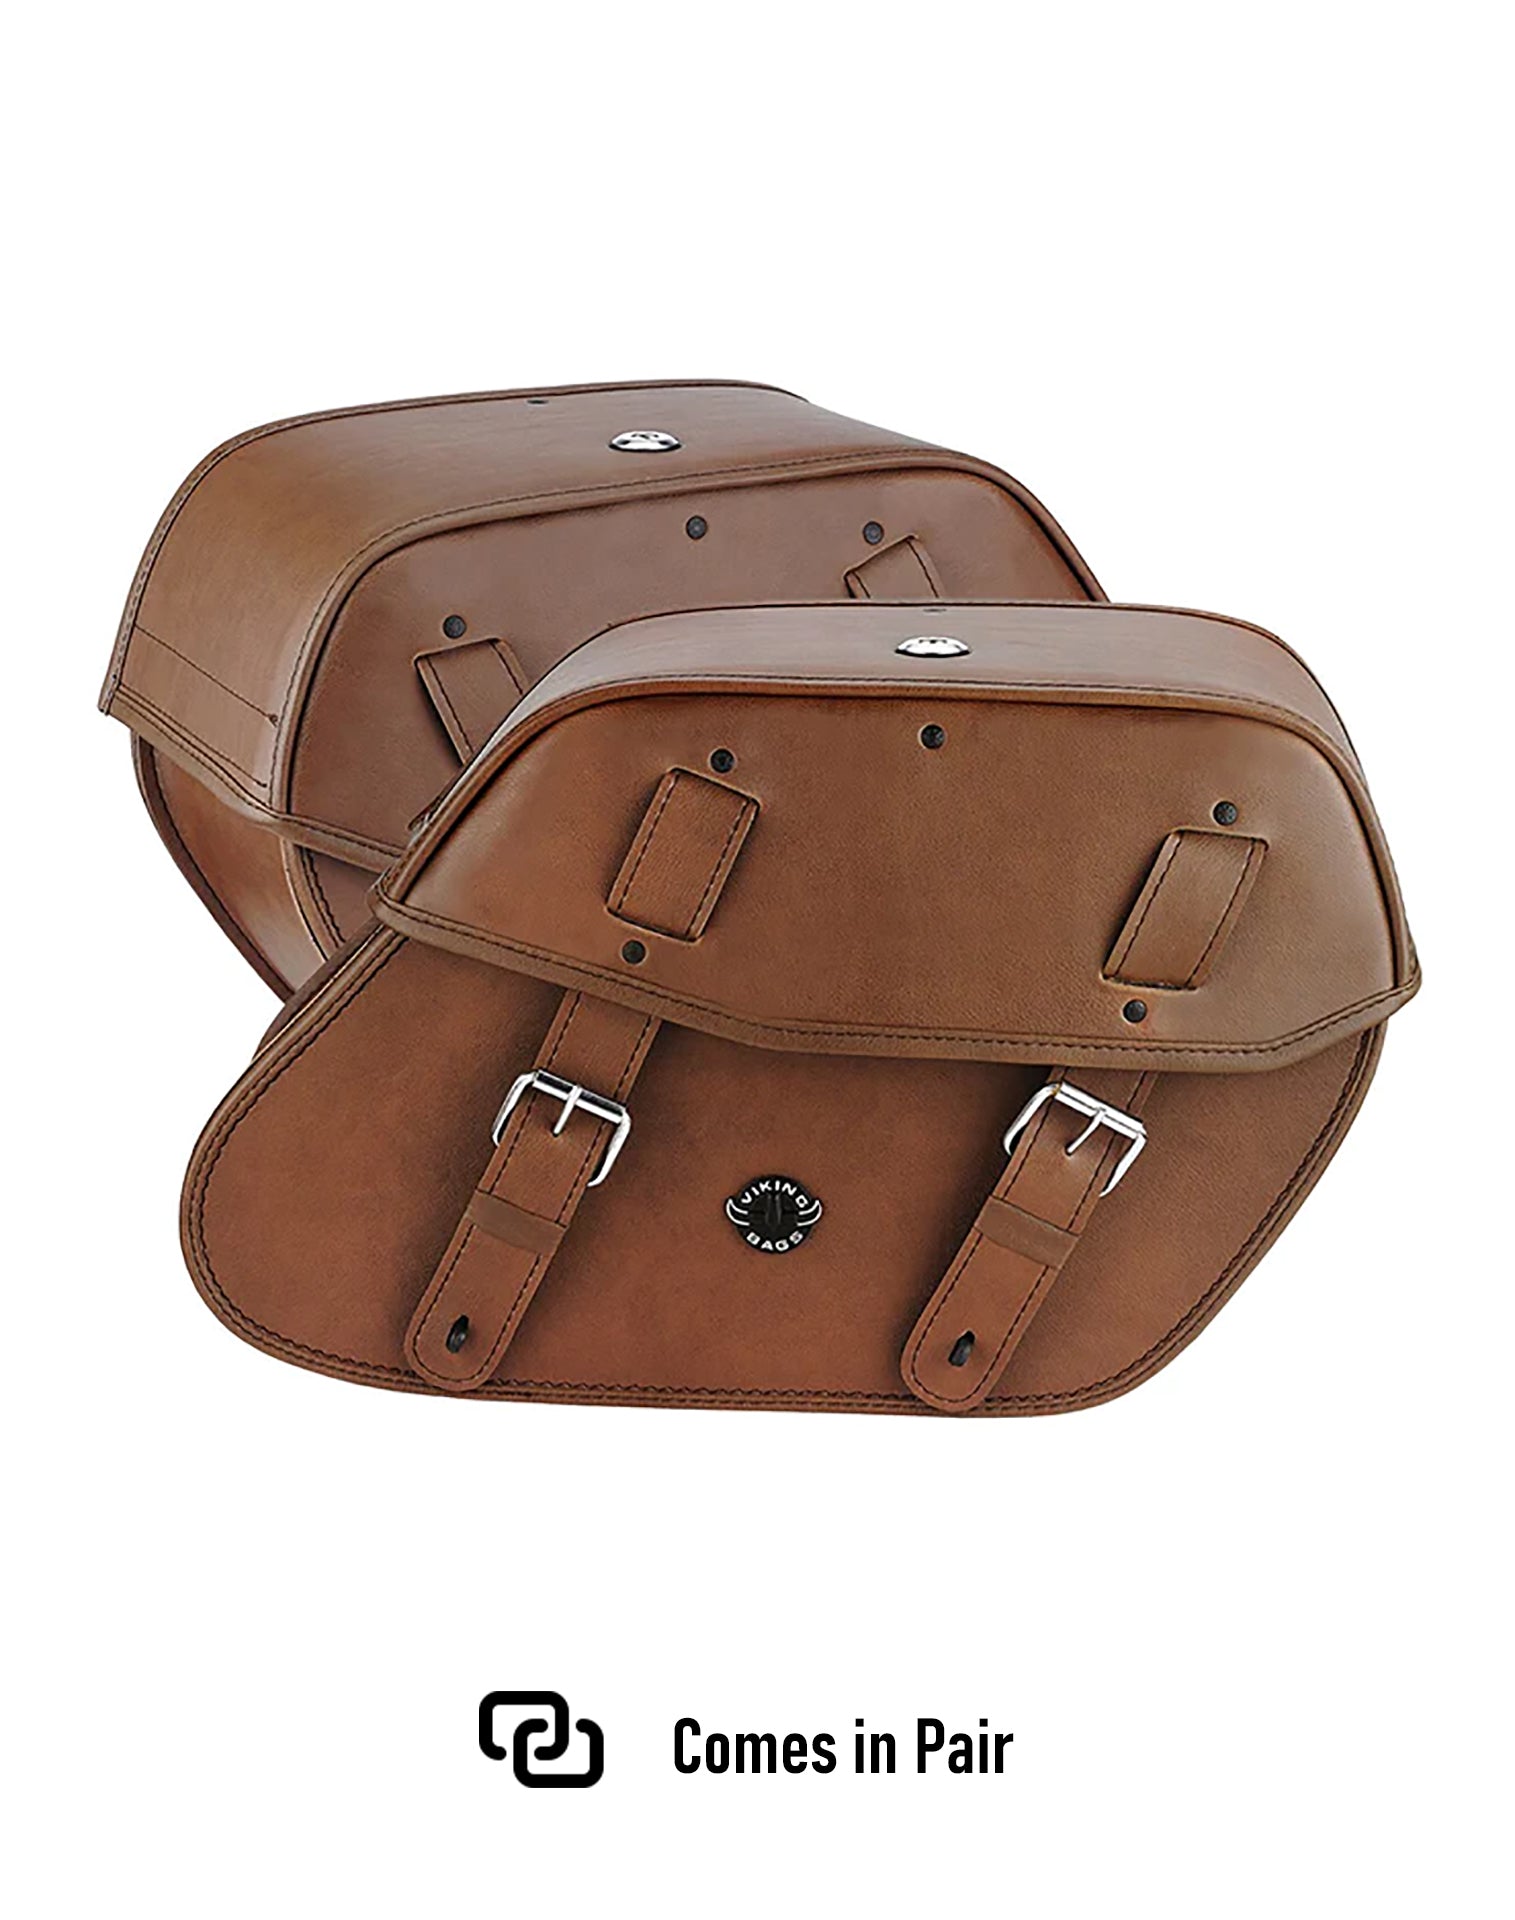 Viking Odin Brown Large Honda Vtx 1300 C Leather Motorcycle Saddlebags Weather Resistant Bags Comes in Pair